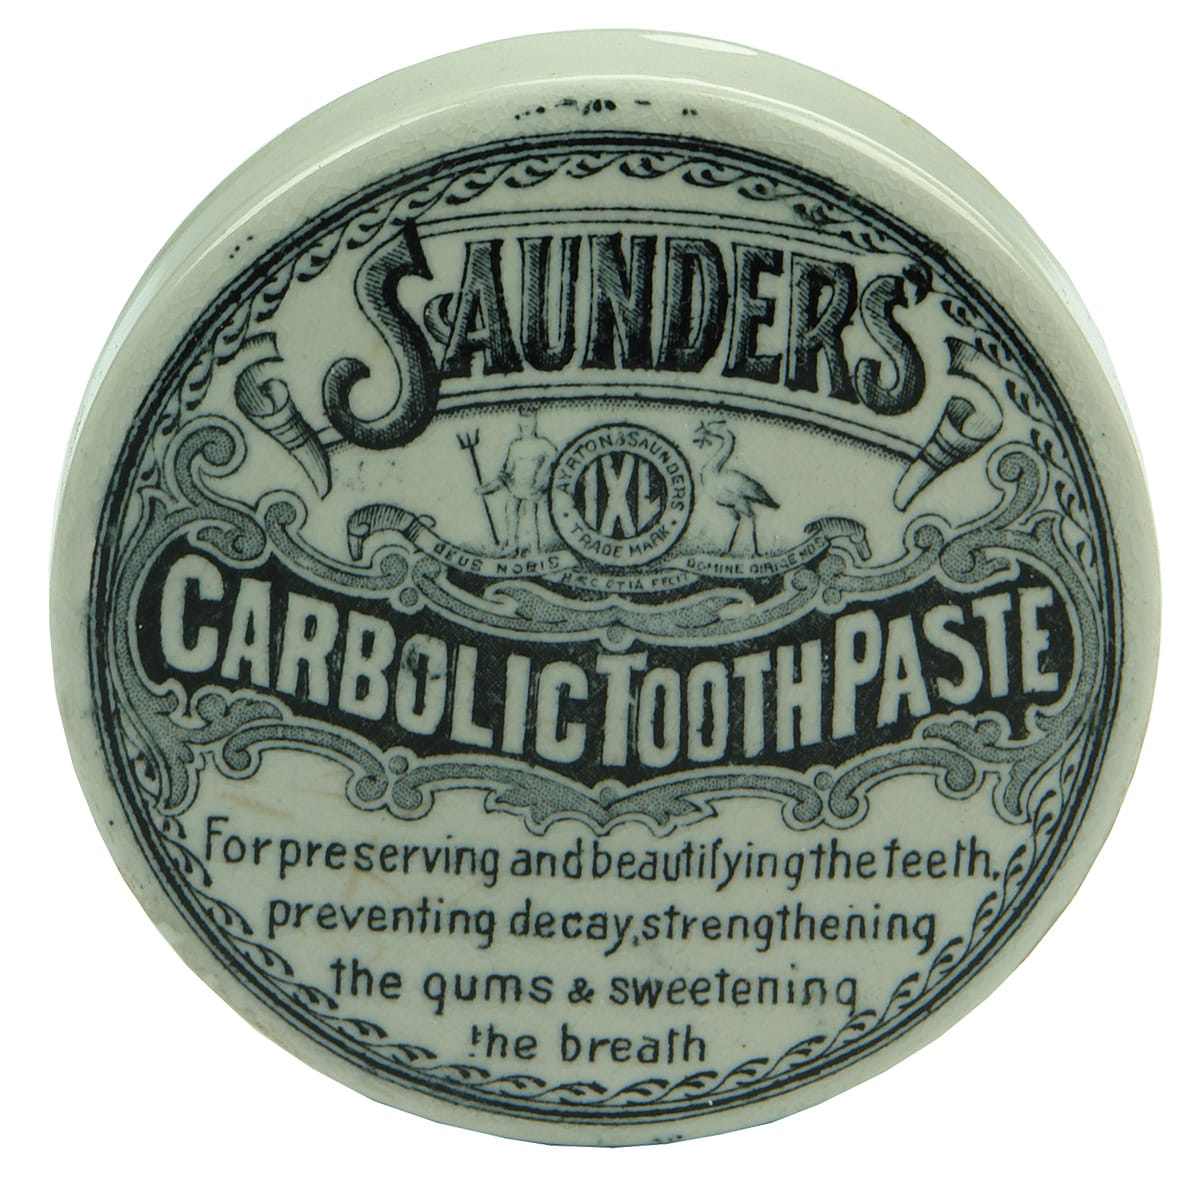 Saunders Carbolic Tooth Paste IXL Pot Lid